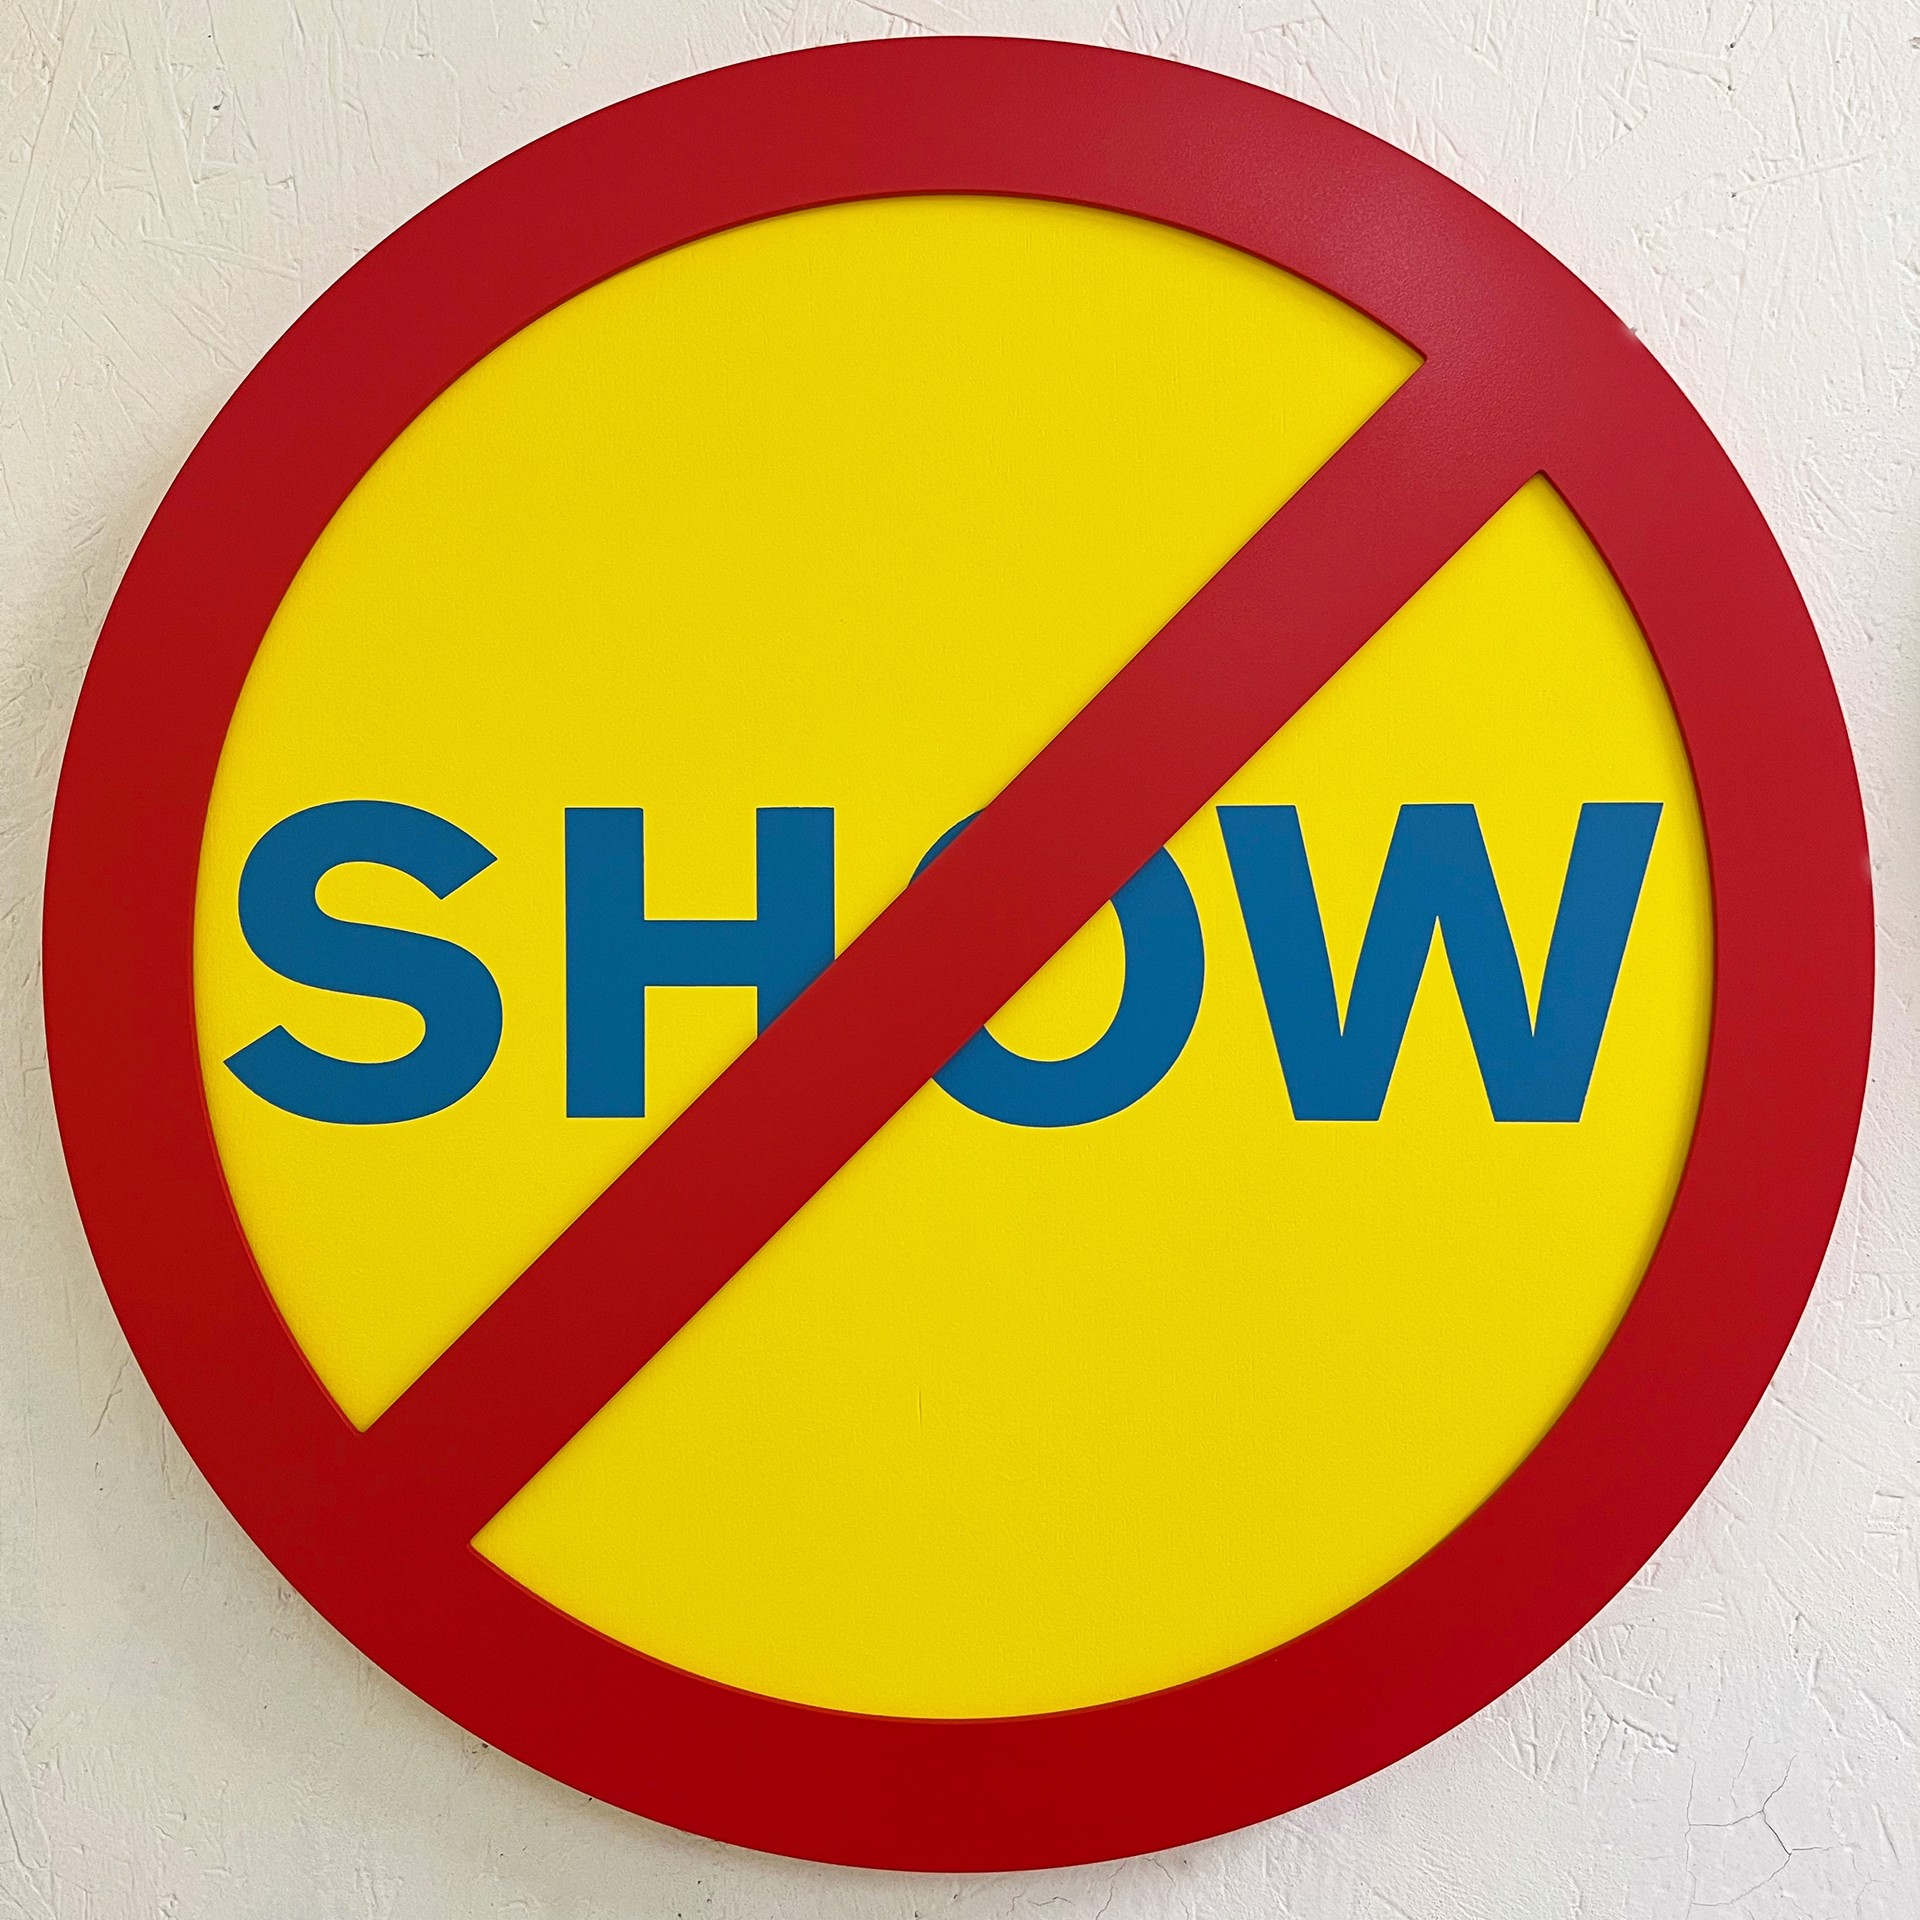 No Show (Blue on Yellow) by Michael Porten